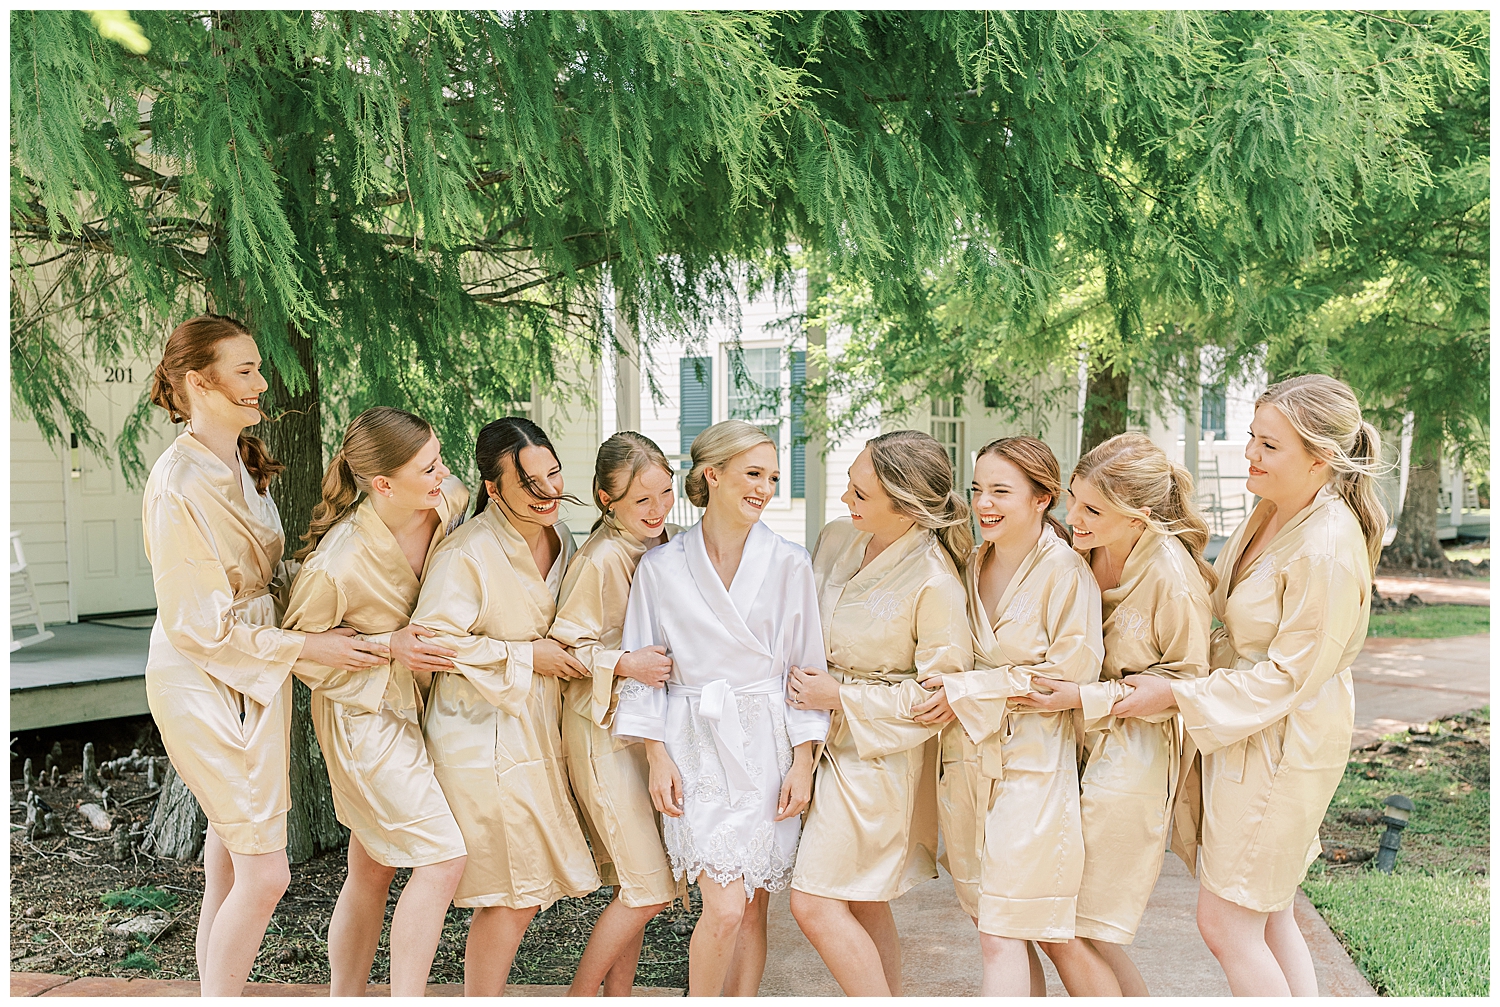 A bride laughs with the bridesmaids.